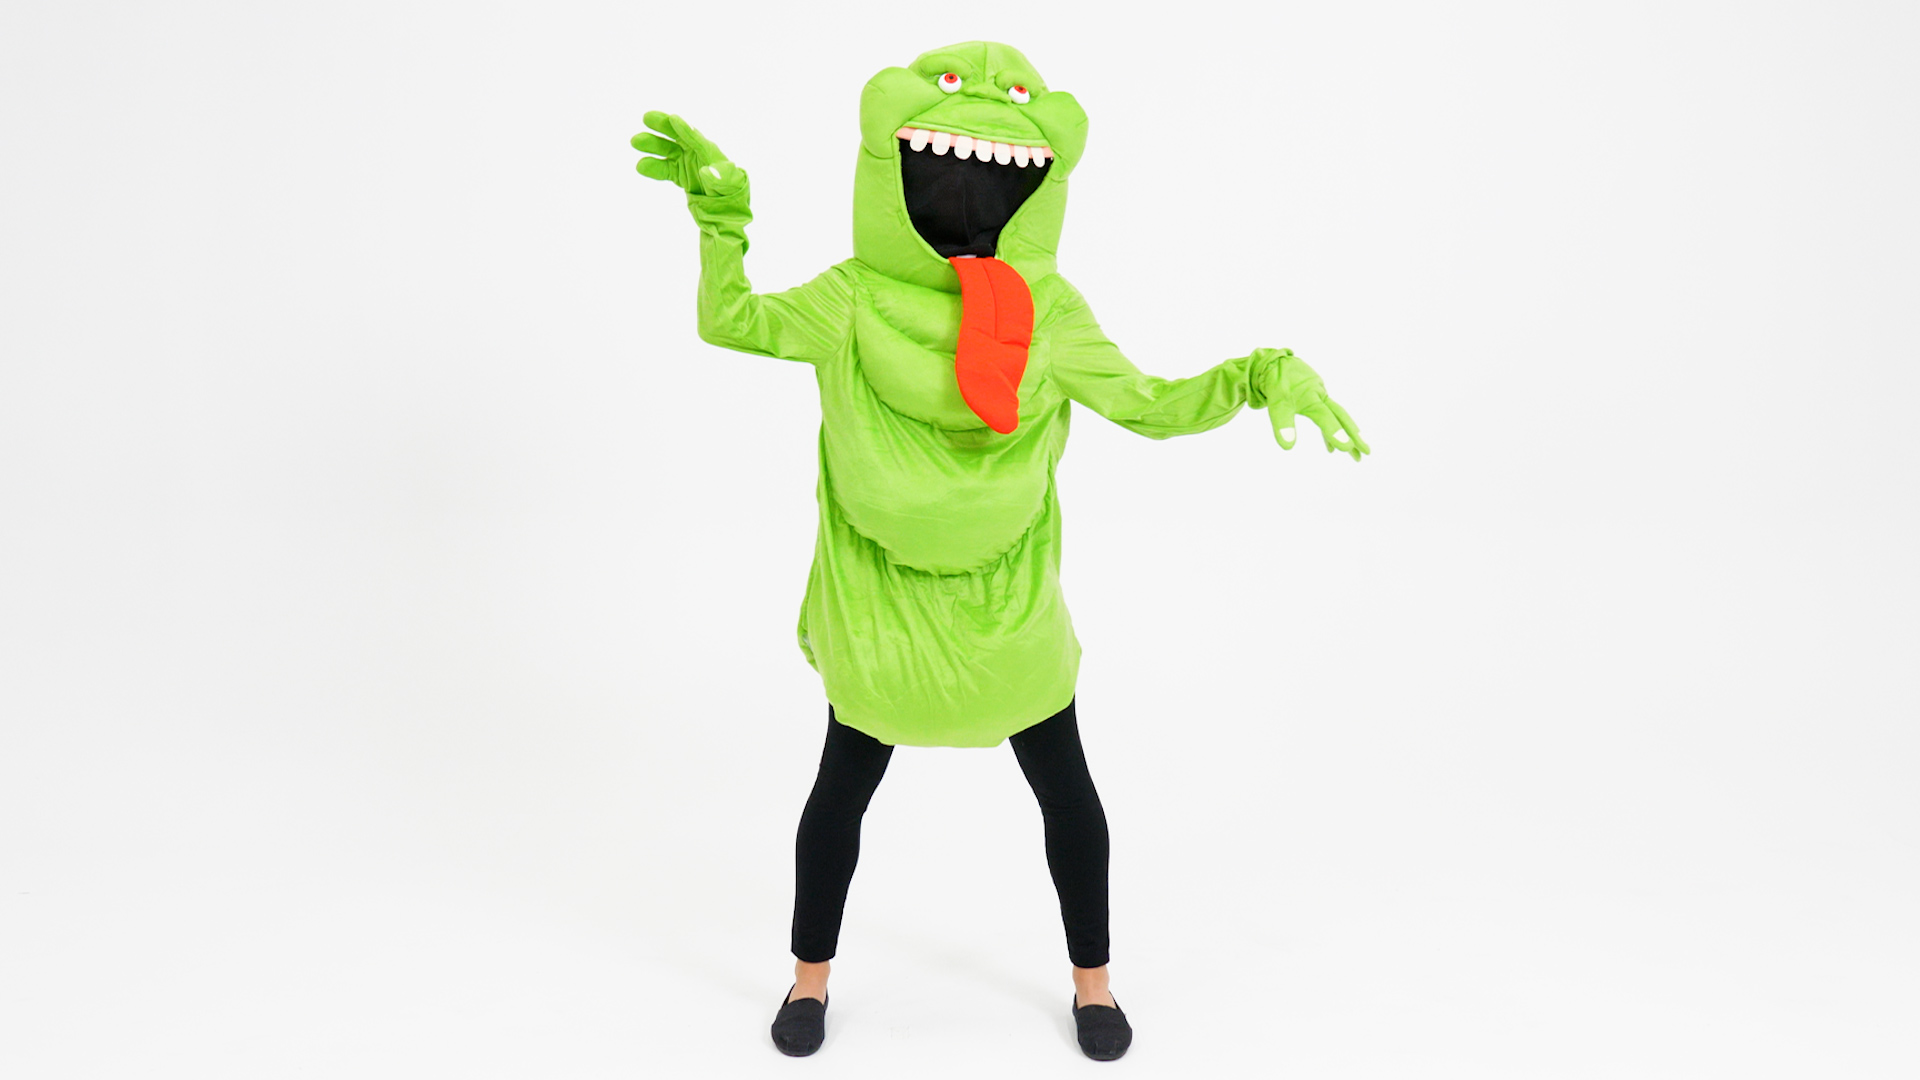 FUN0859AD Ghostbusters Adult Slimer Costume